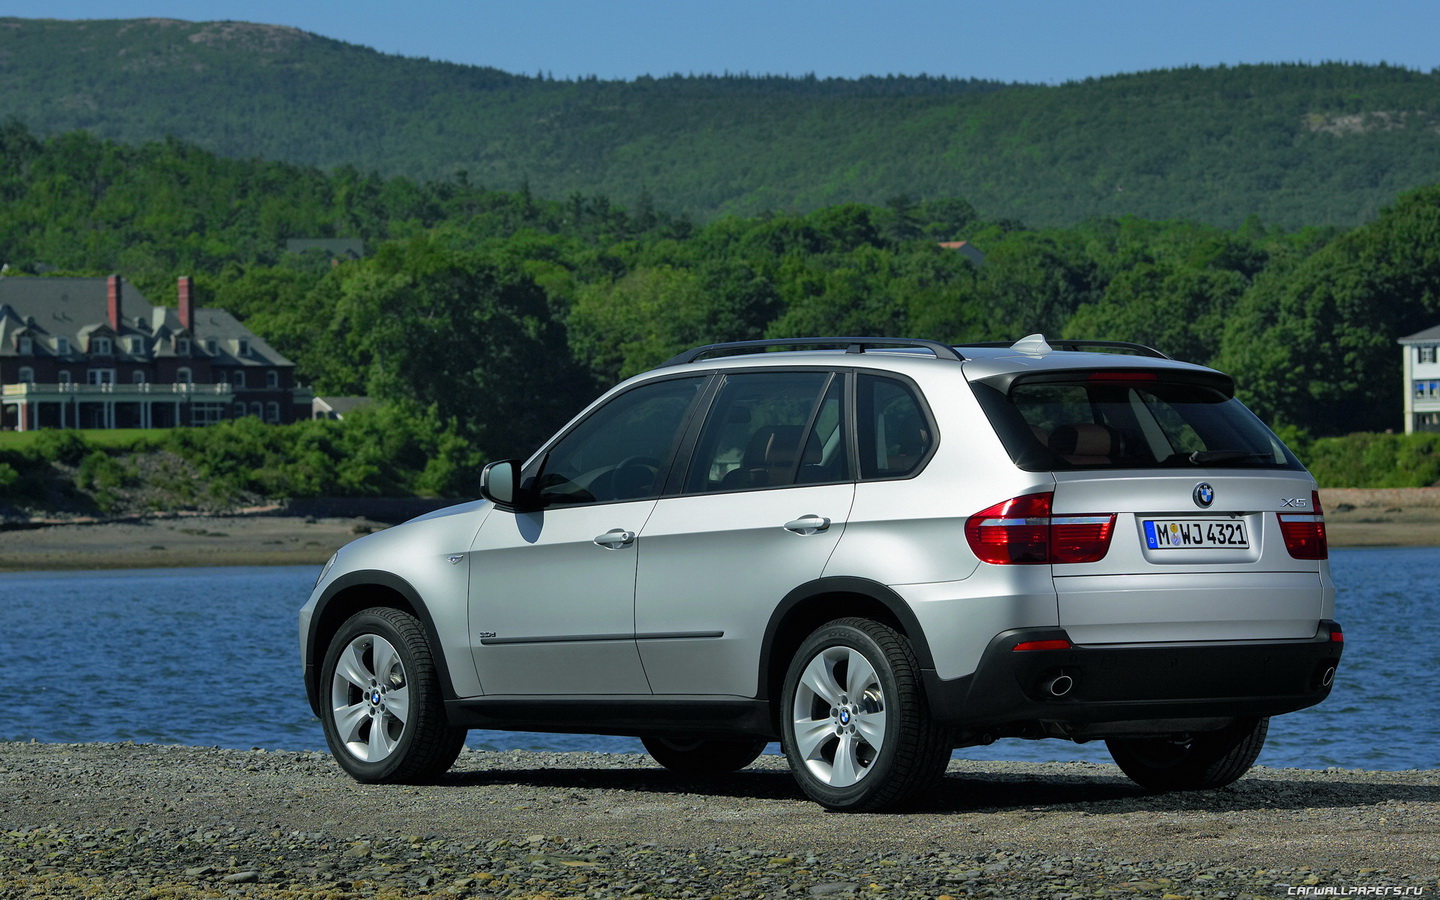 BMW X5 2006: Review, Amazing Pictures and Images - Look at the car